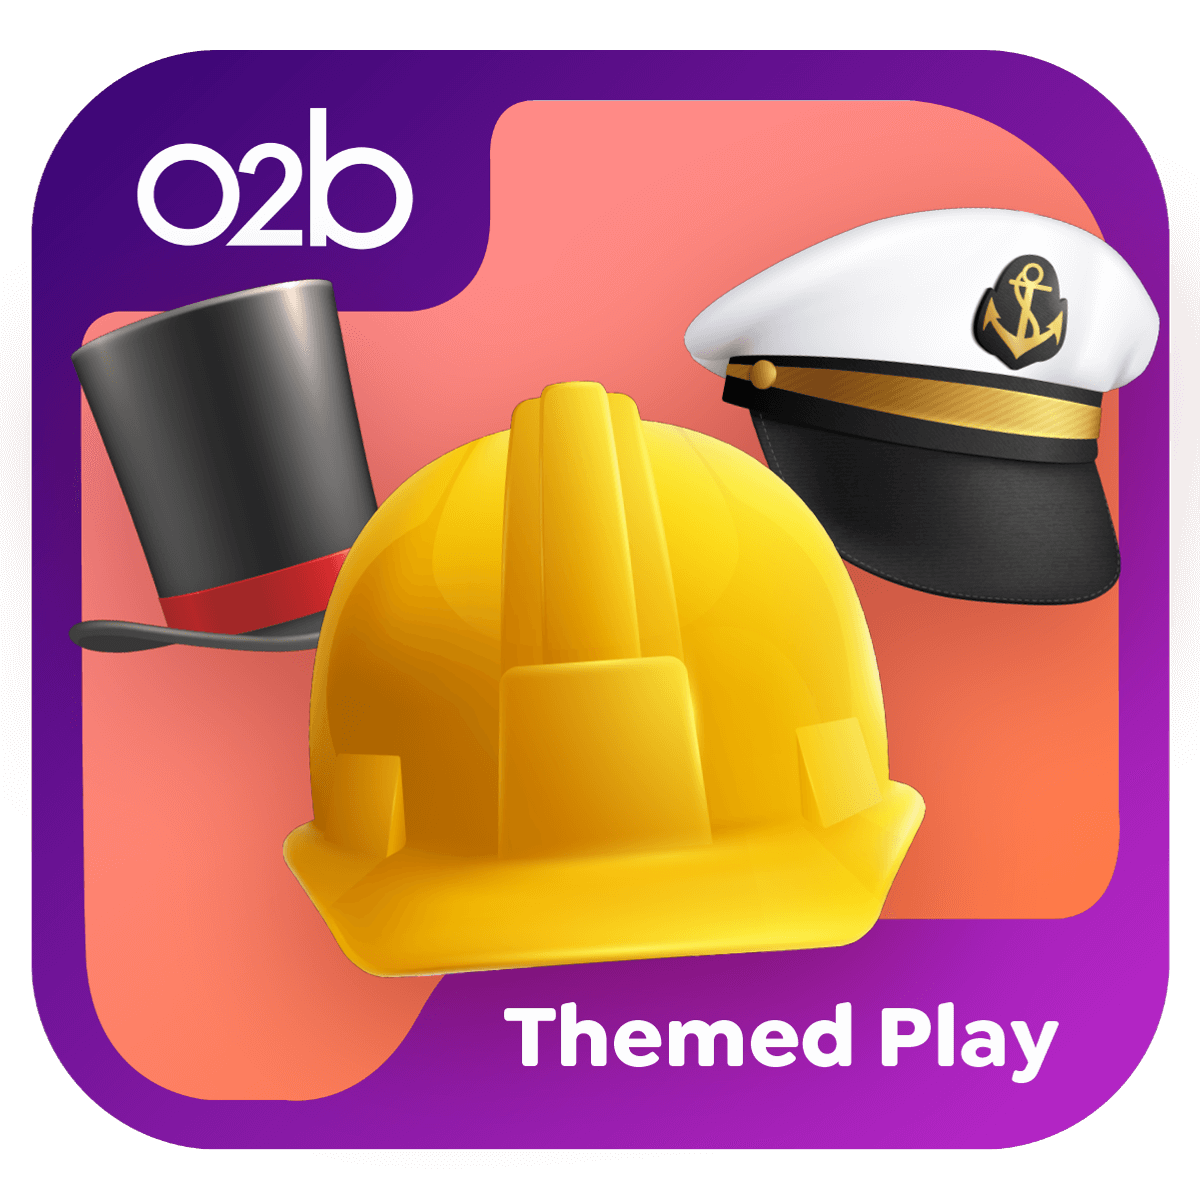 Construction hat, sailor hat. and magician hat on salmon color background. O2B - Themed Play